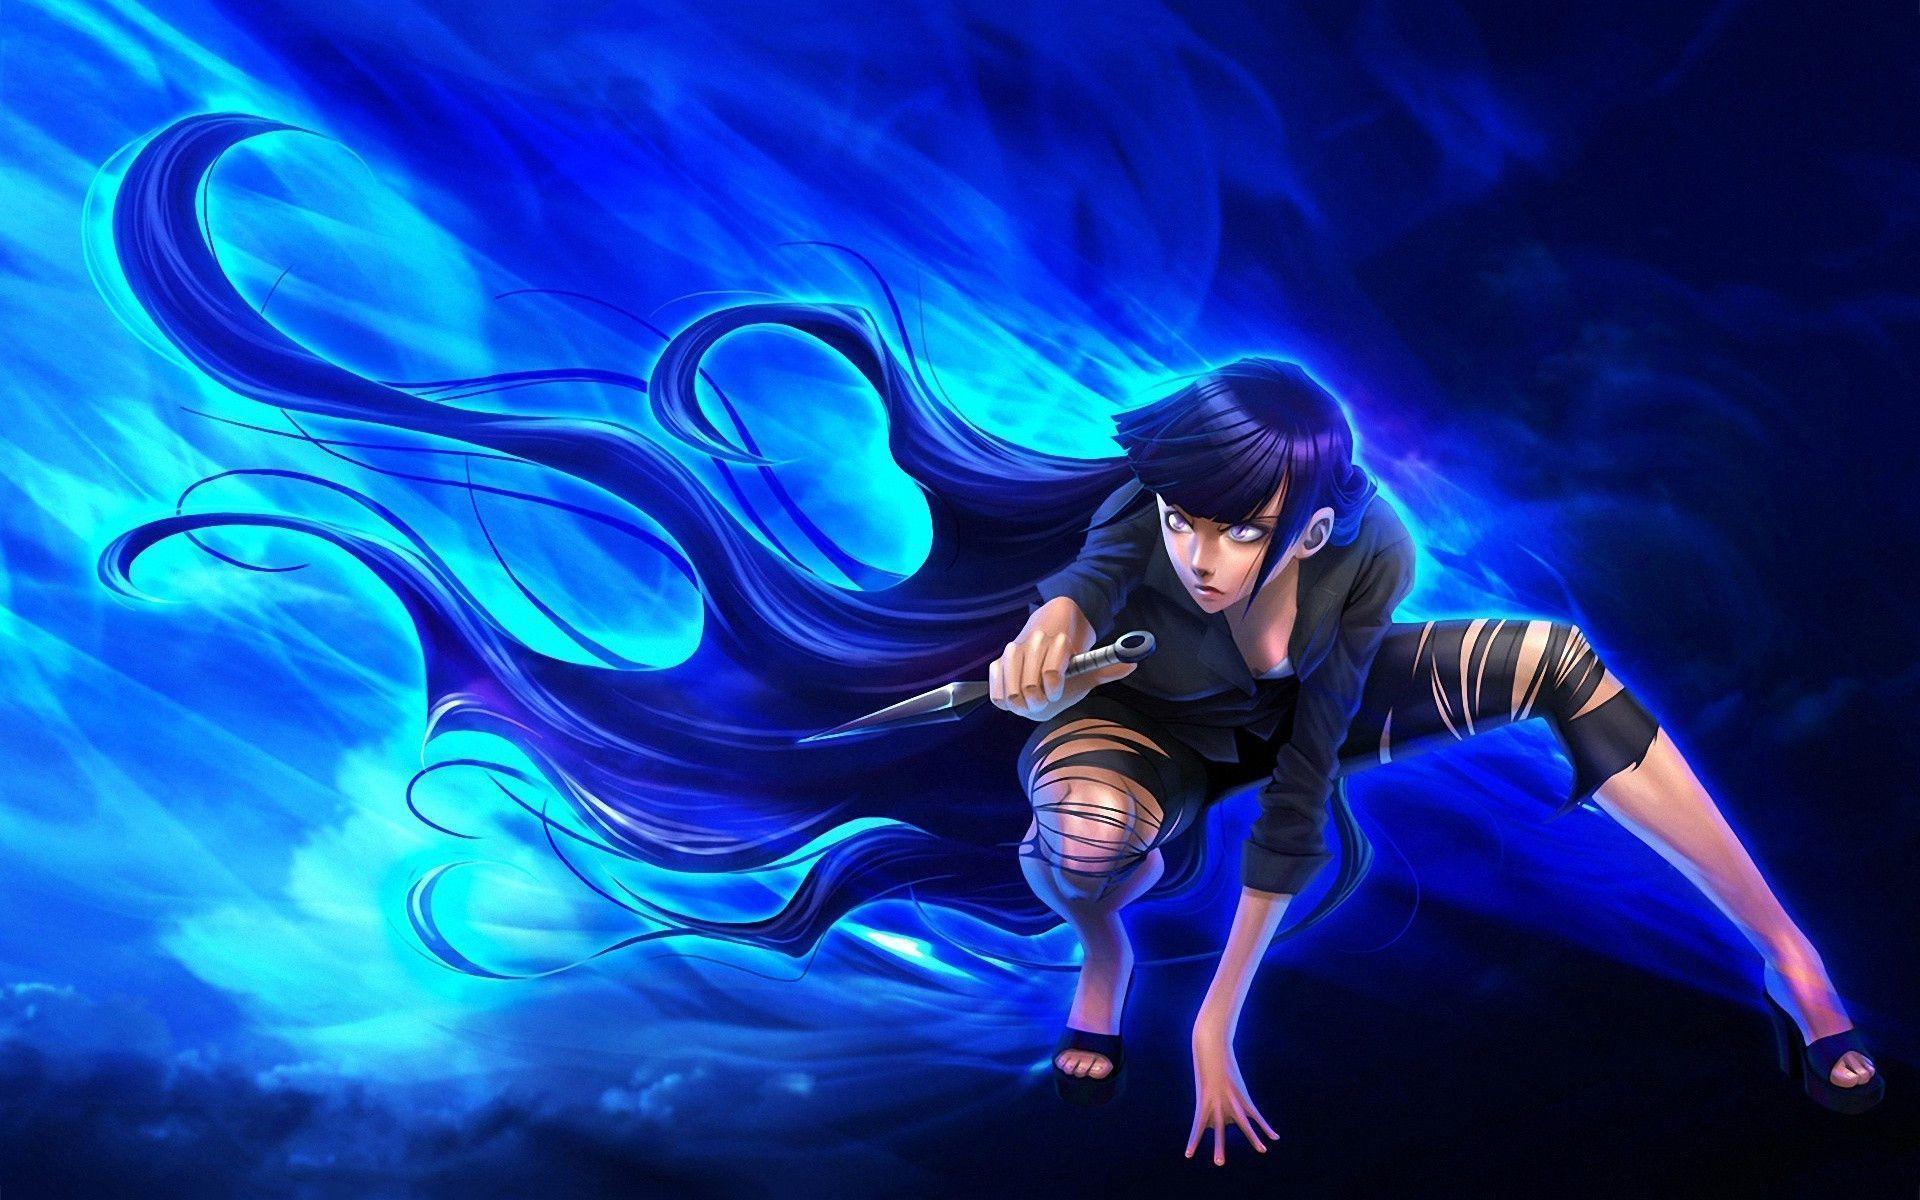  Hinata Wallpaper Hd of all time Check it out now 